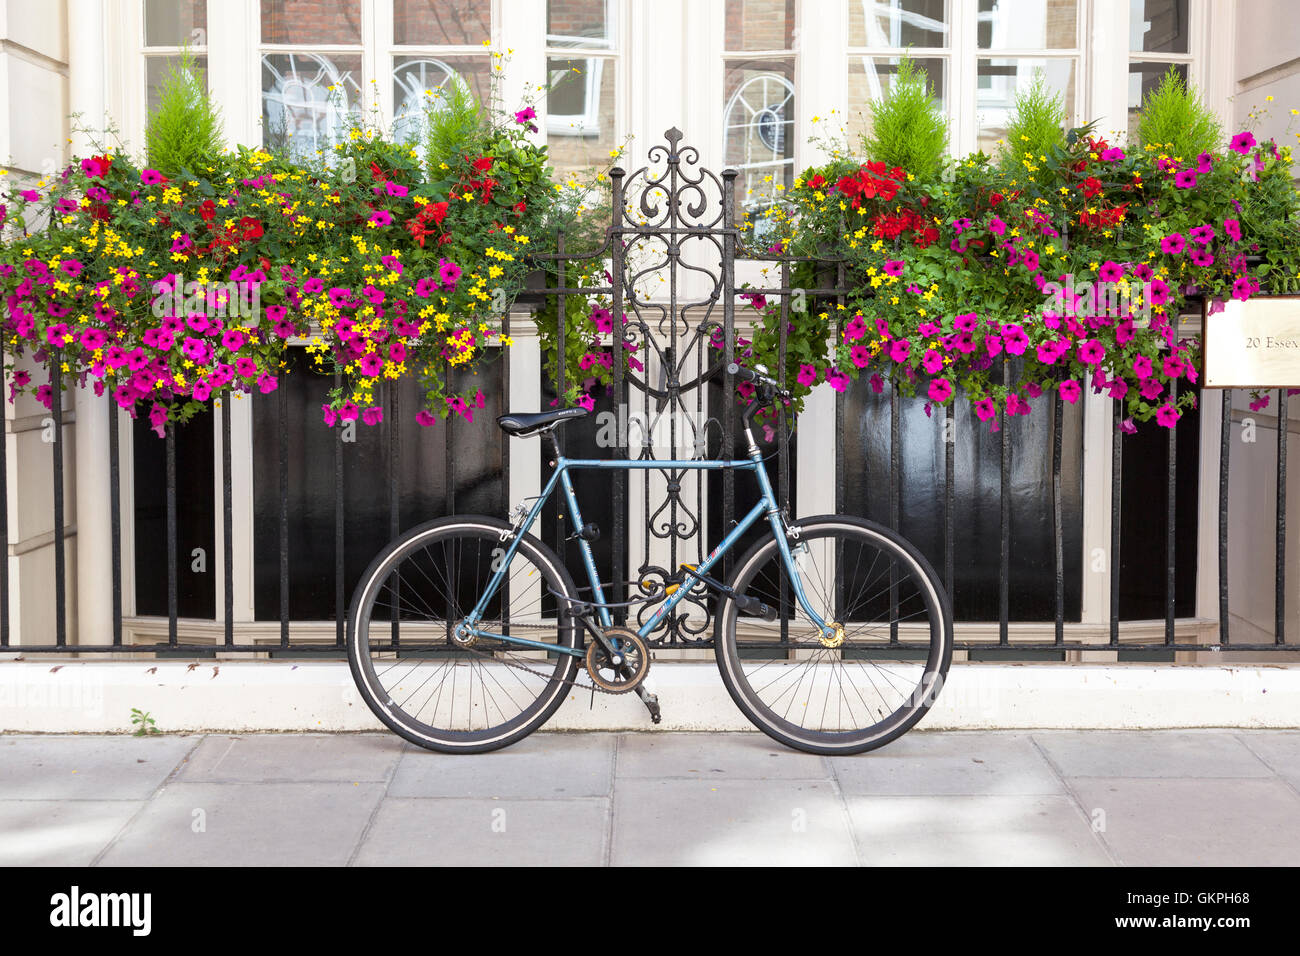 Bicycle chained to a railing in front of a nice house Stock Photo